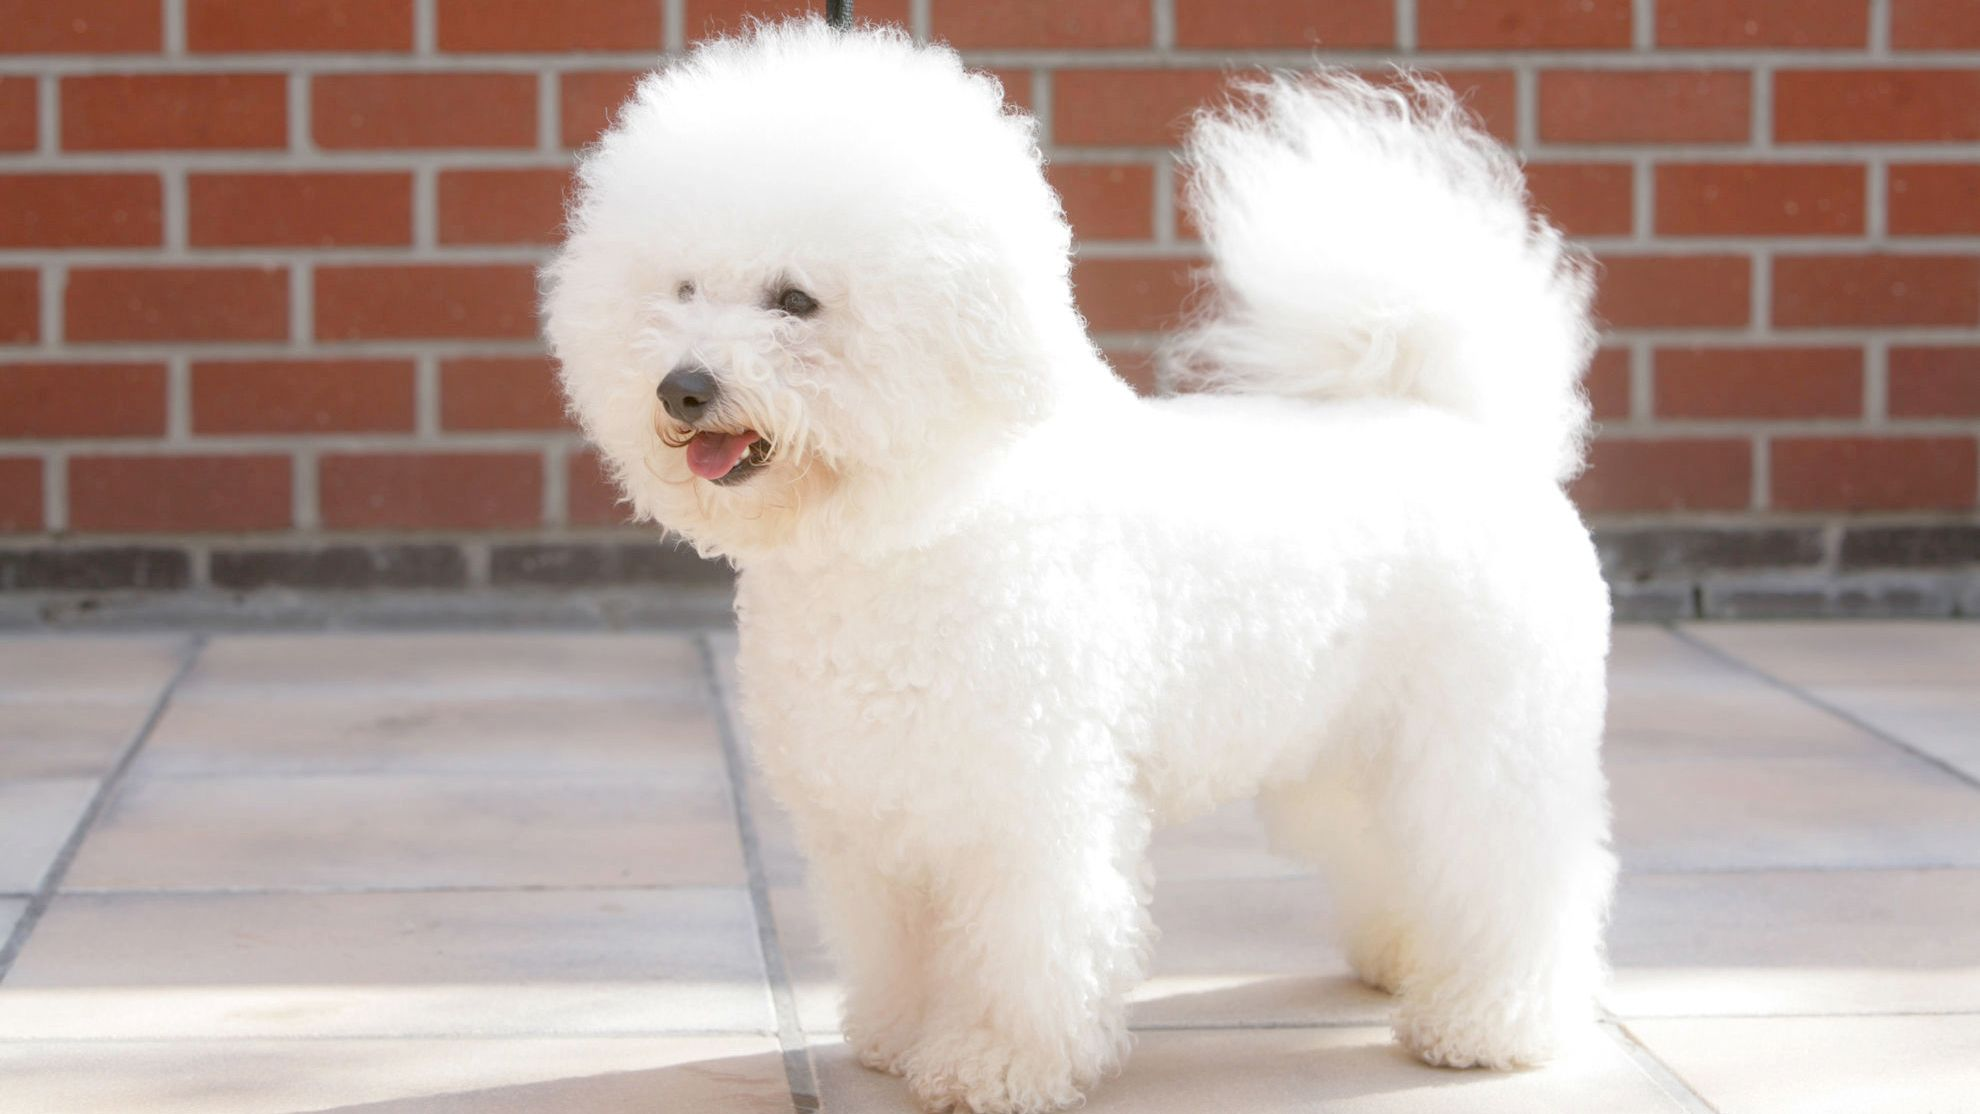 Bichon Frise standing on a paved terrace